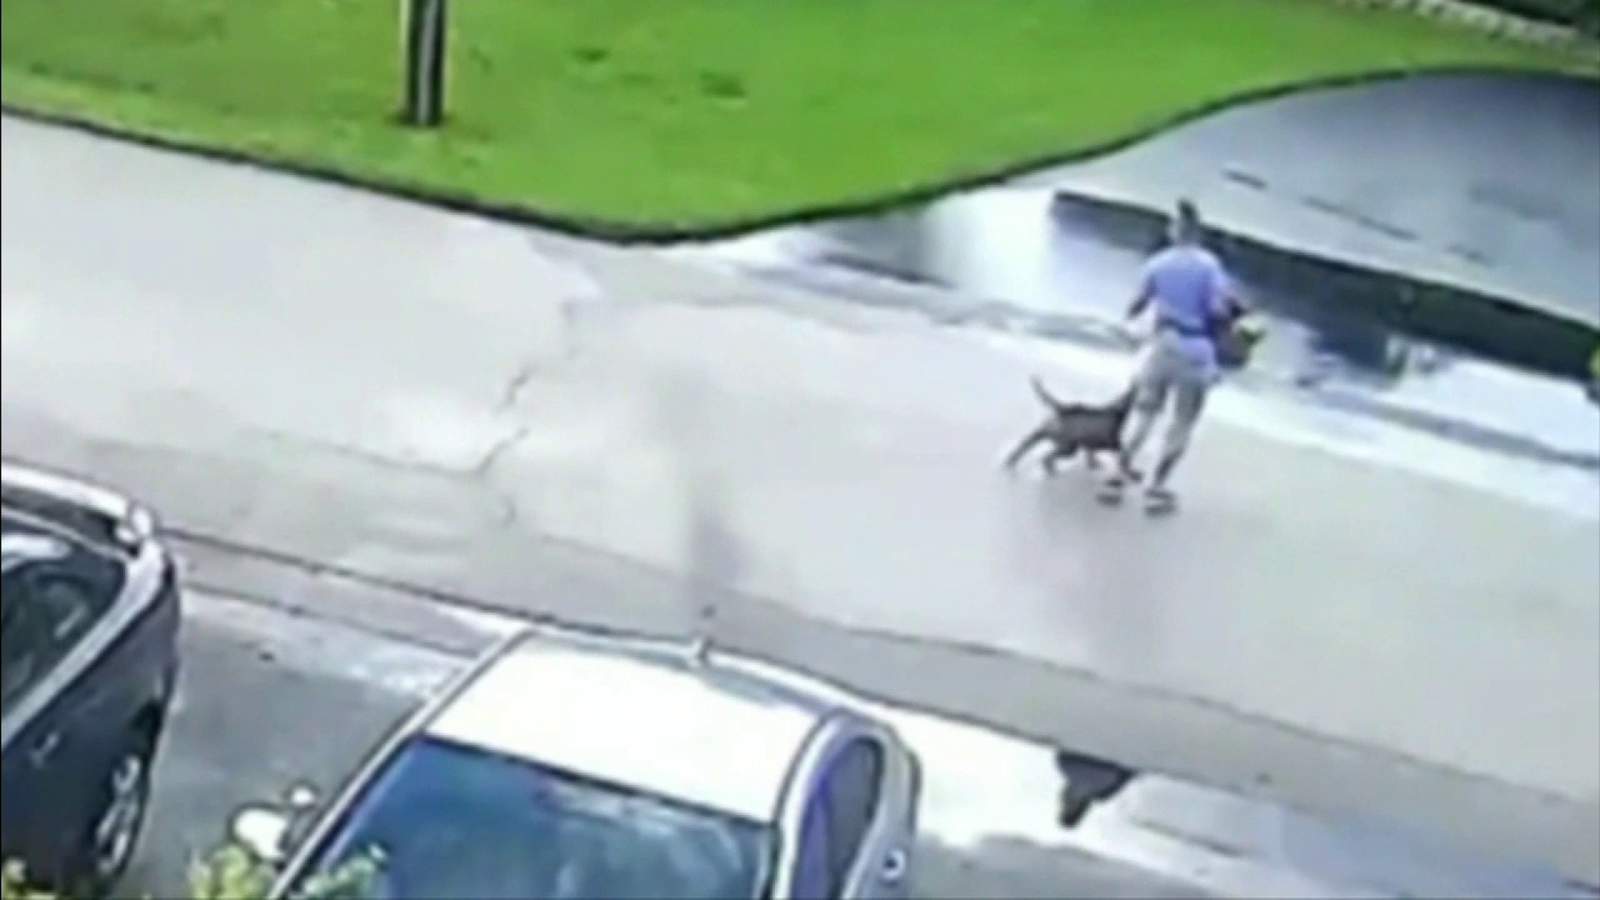 WATCH: Dog involved in vicious attack caught on video taken from home